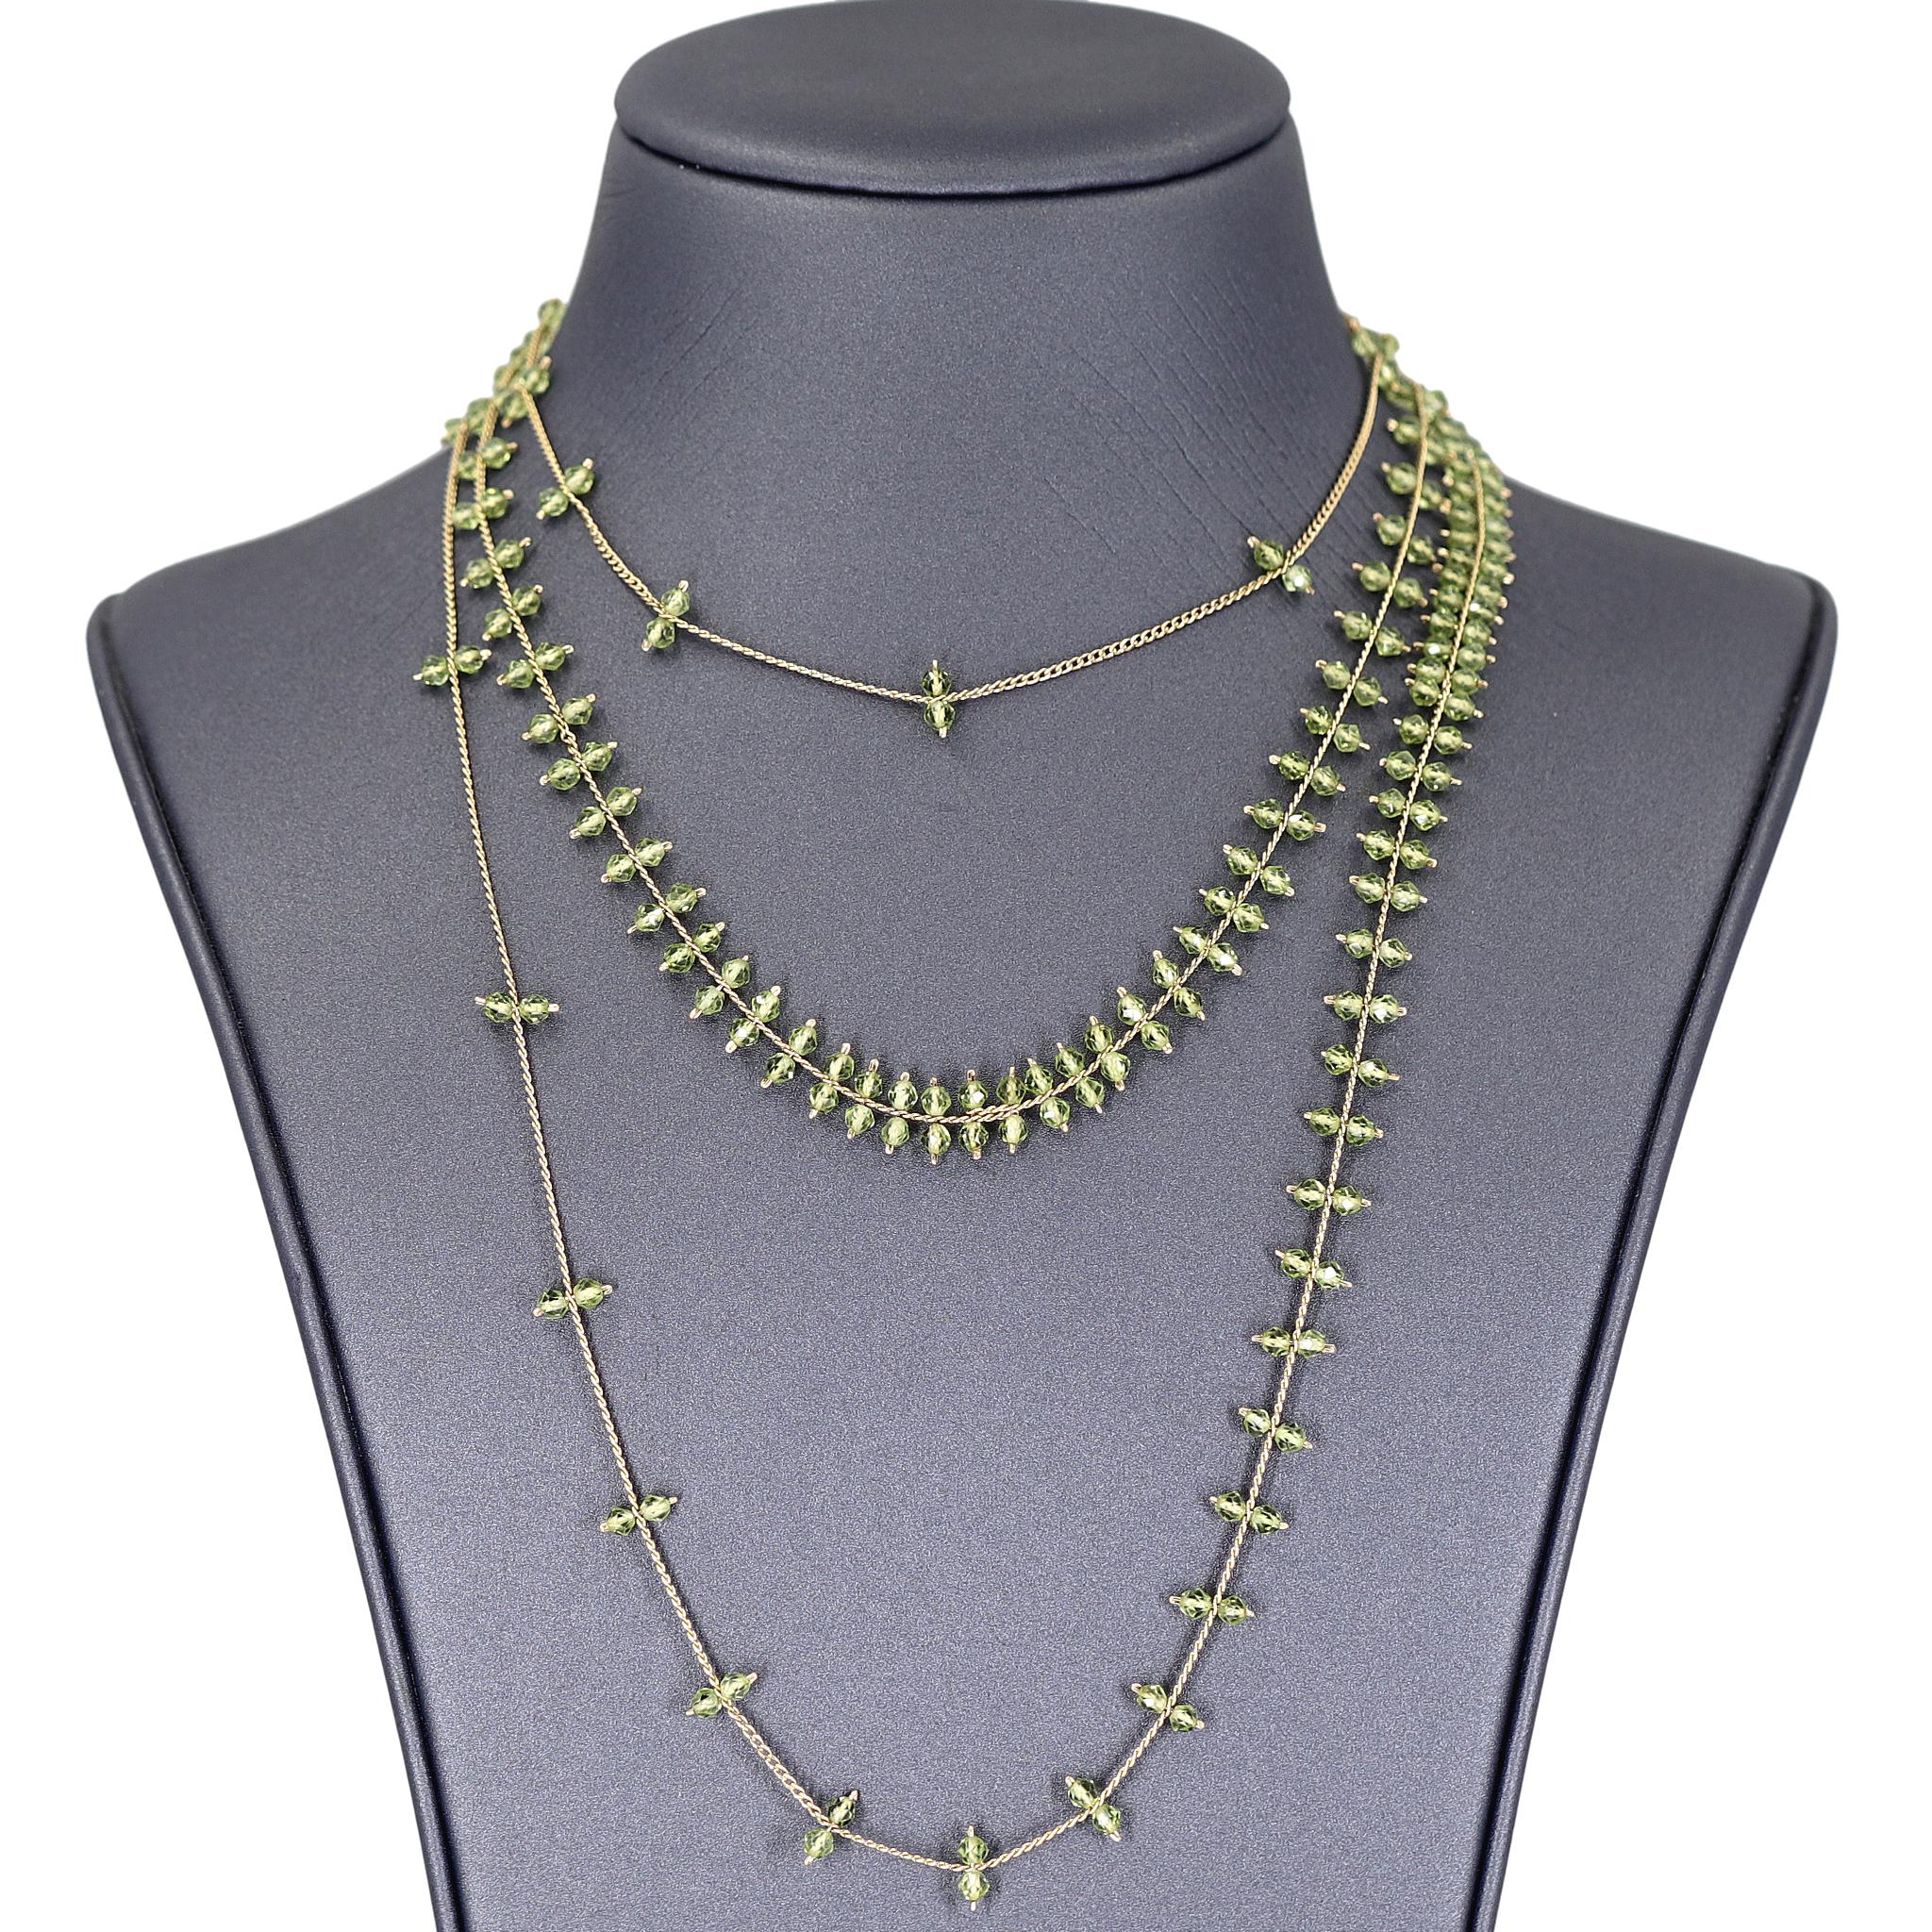 Rain Necklace hand-fabricated by jewelry maker Estyn Hulbert featuring a gorgeous double cascade of individually-set faceted peridot beads all strung on 50 inches of lustrous 14k gold-filled chain. Wearable at multiple lengths. 

About the Maker -